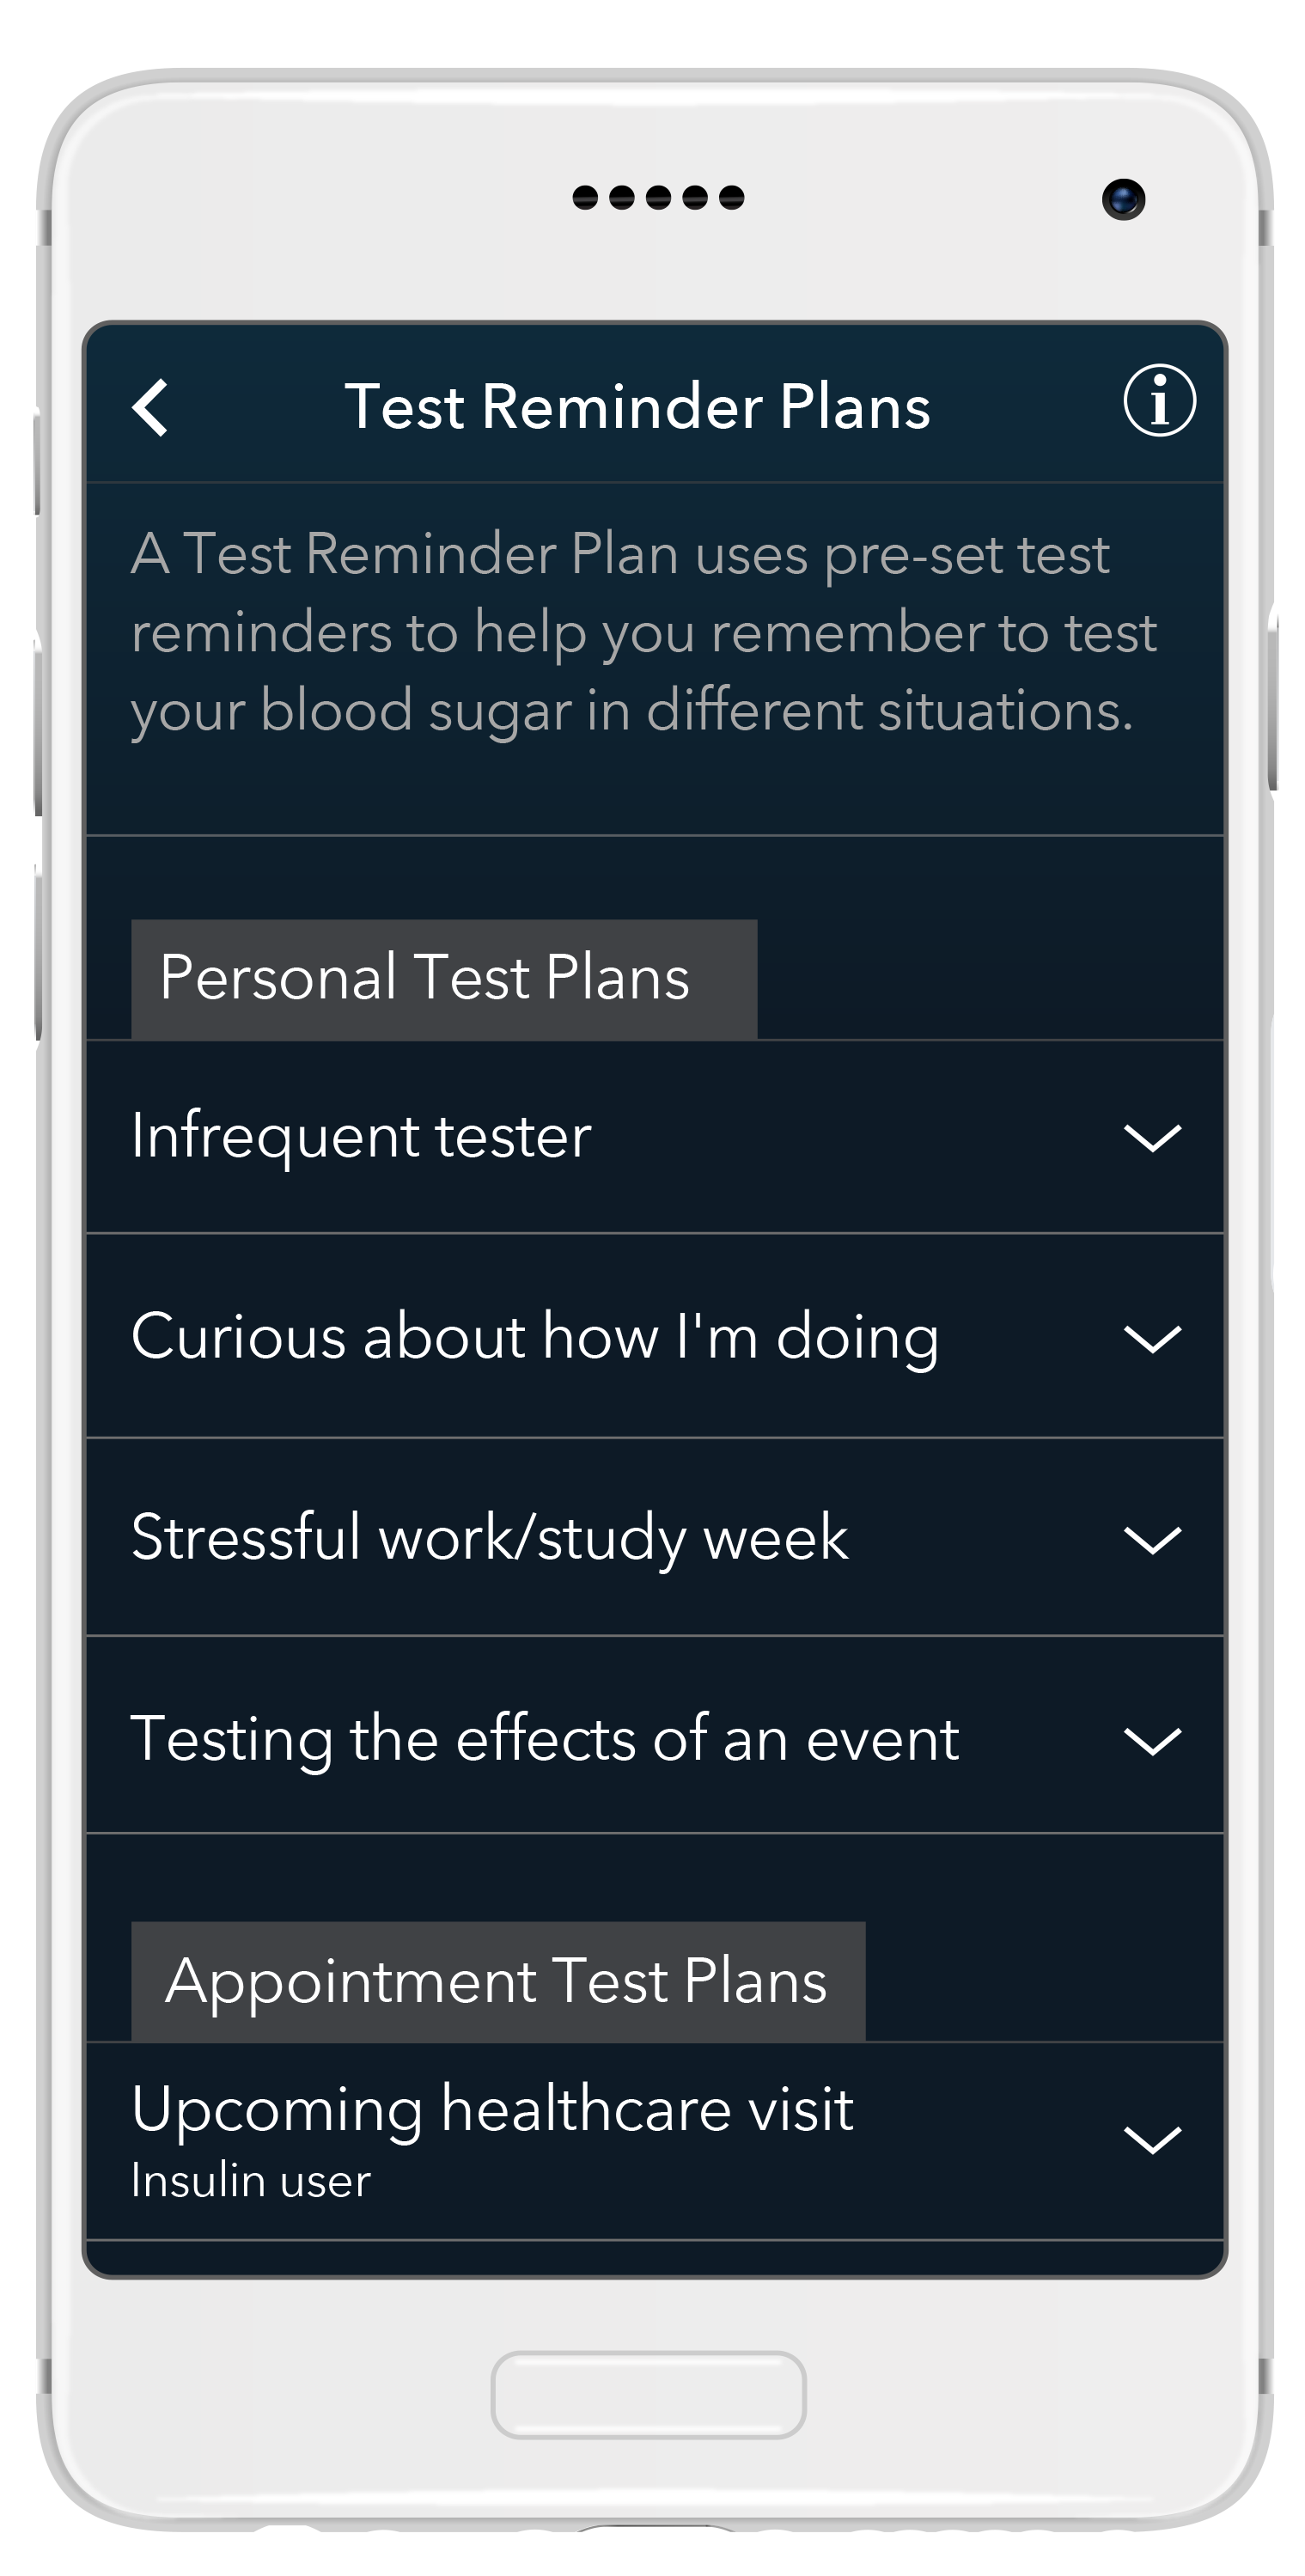 Multiple plan options available in the app